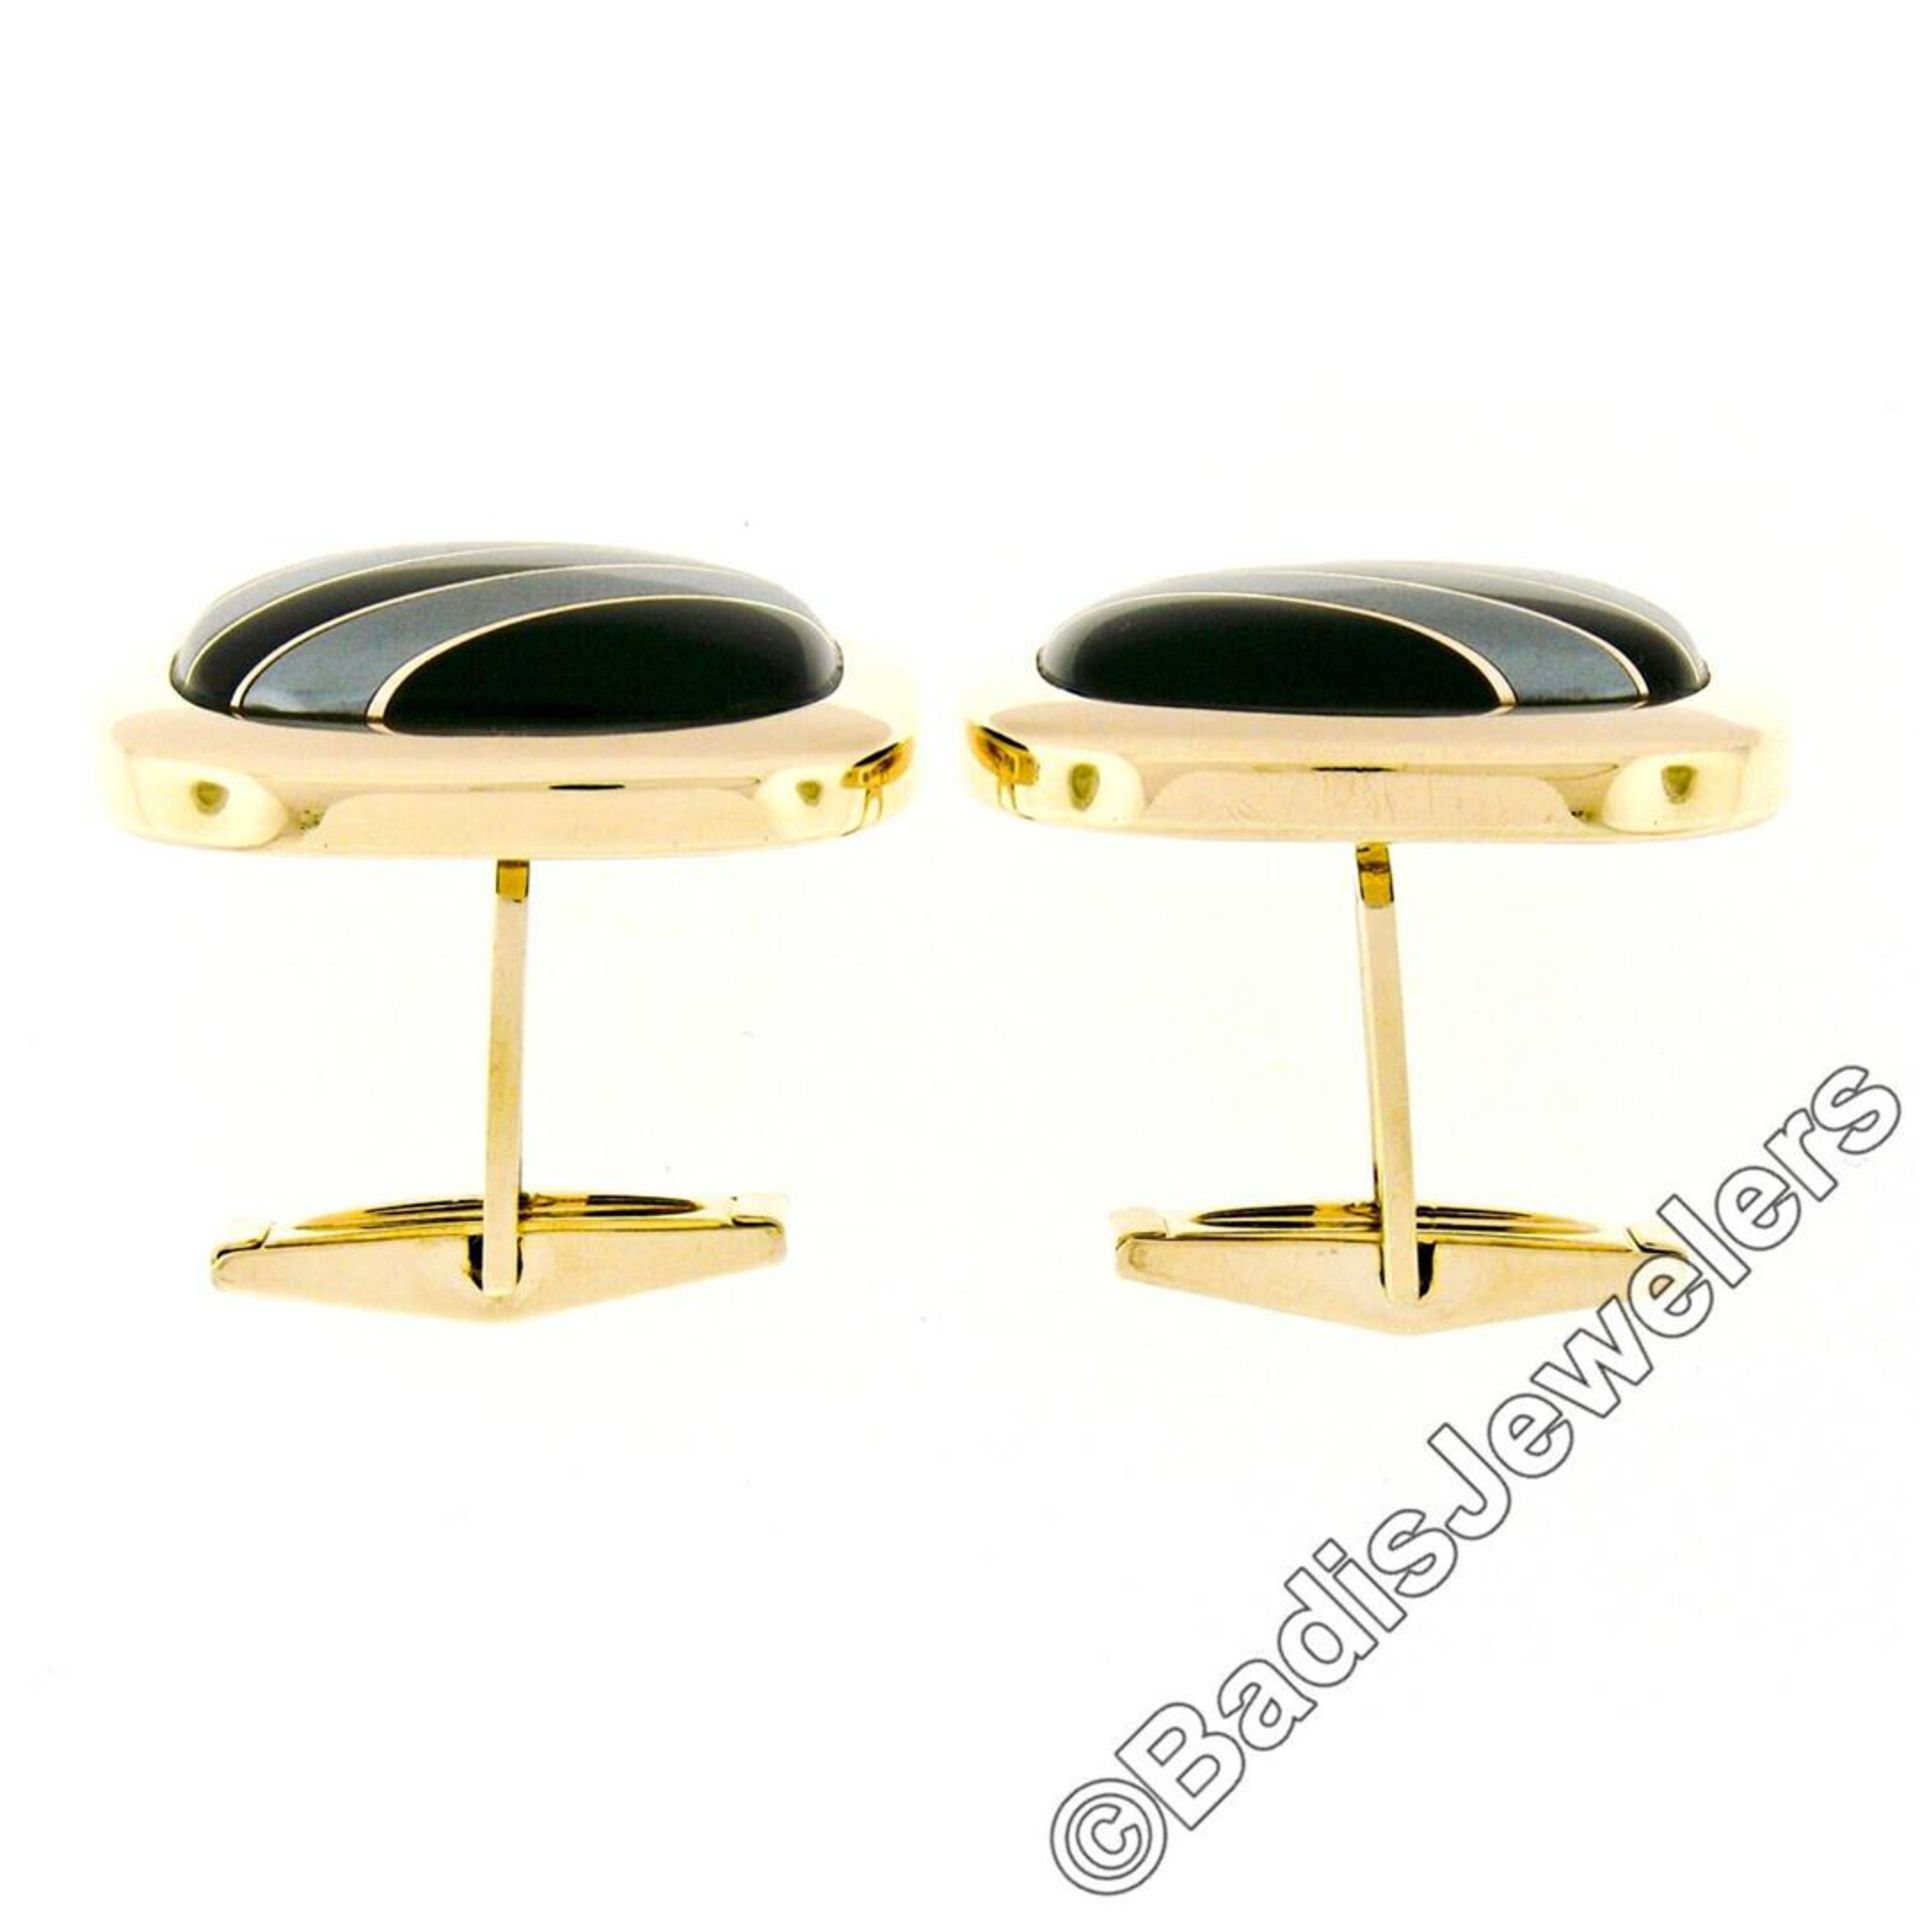 Vintage 14kt Yellow Gold Swivel Cuff Links w/ Hematite Inlaid in Black Onyx - Image 5 of 6